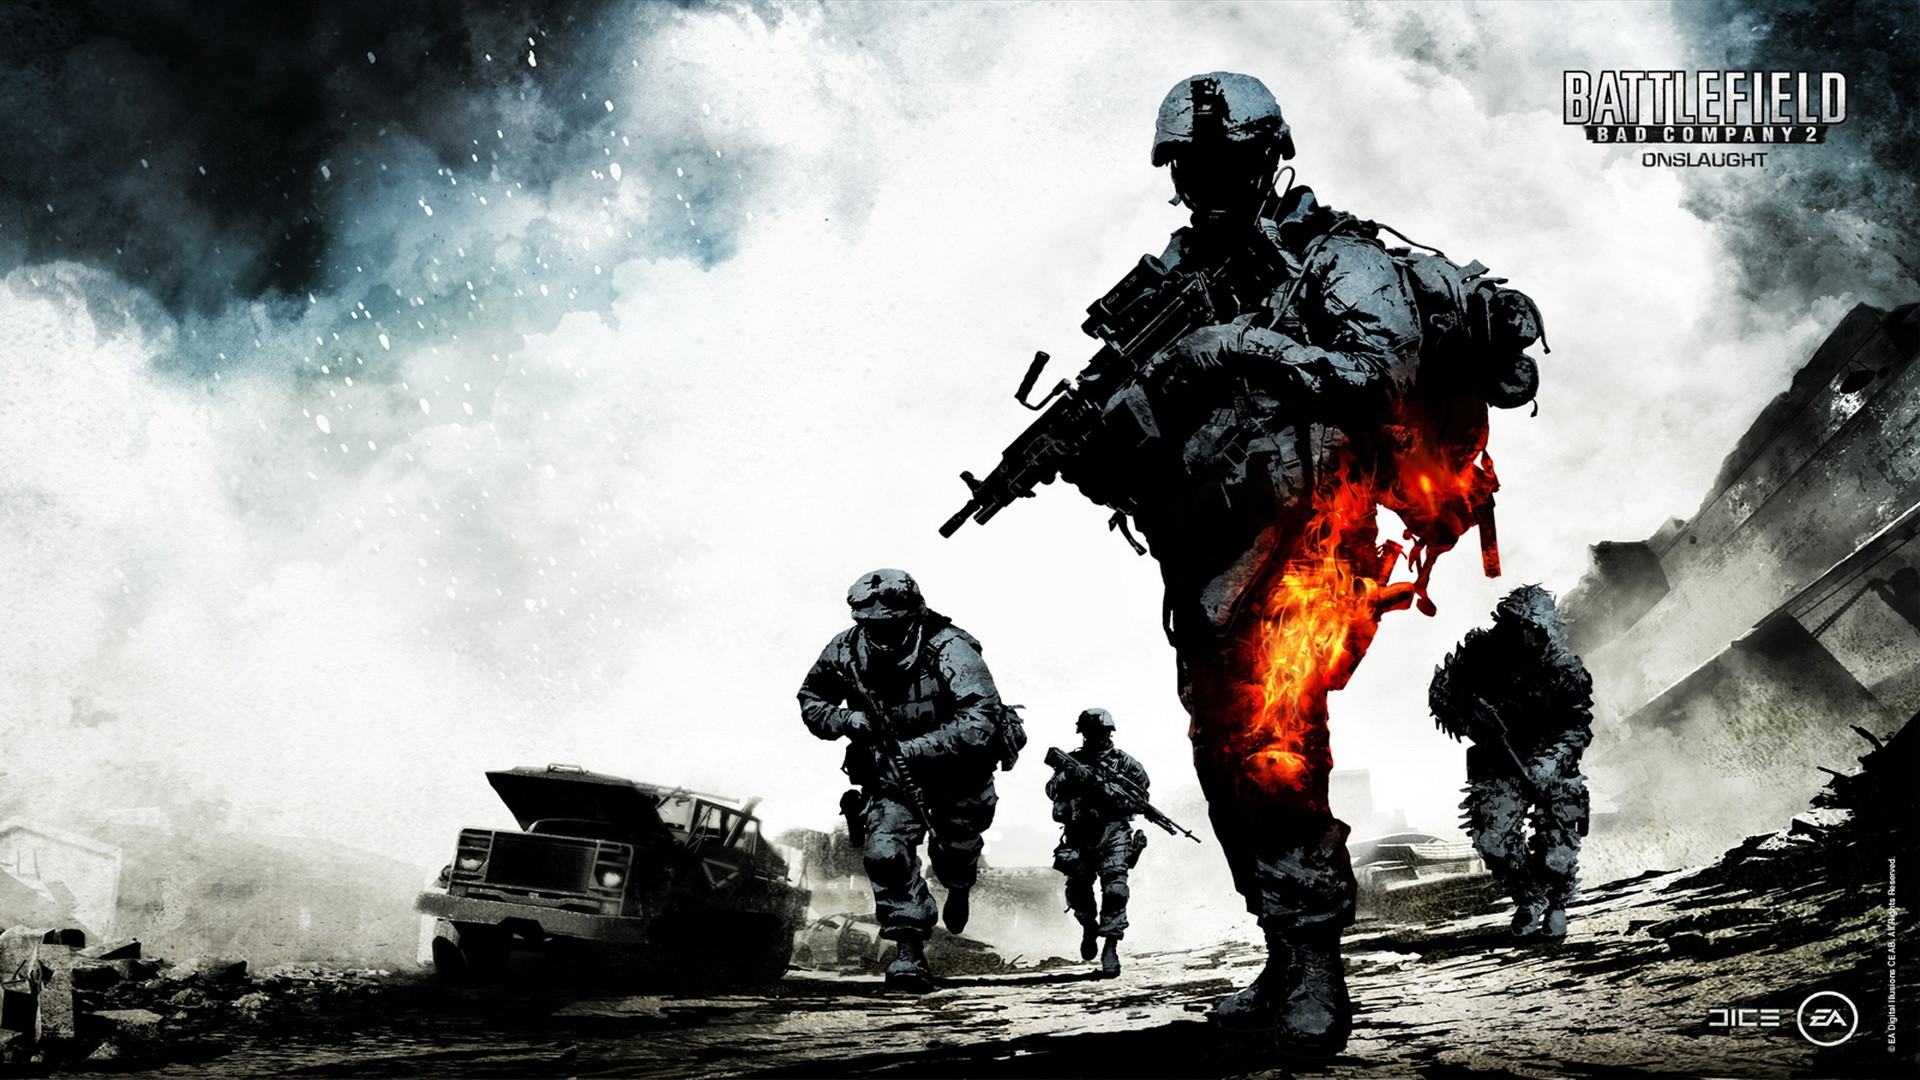 1920x1080, Games Wallpapers Hd 1080p On Wallpaperget - Battlefield Bad Company 2 - HD Wallpaper 